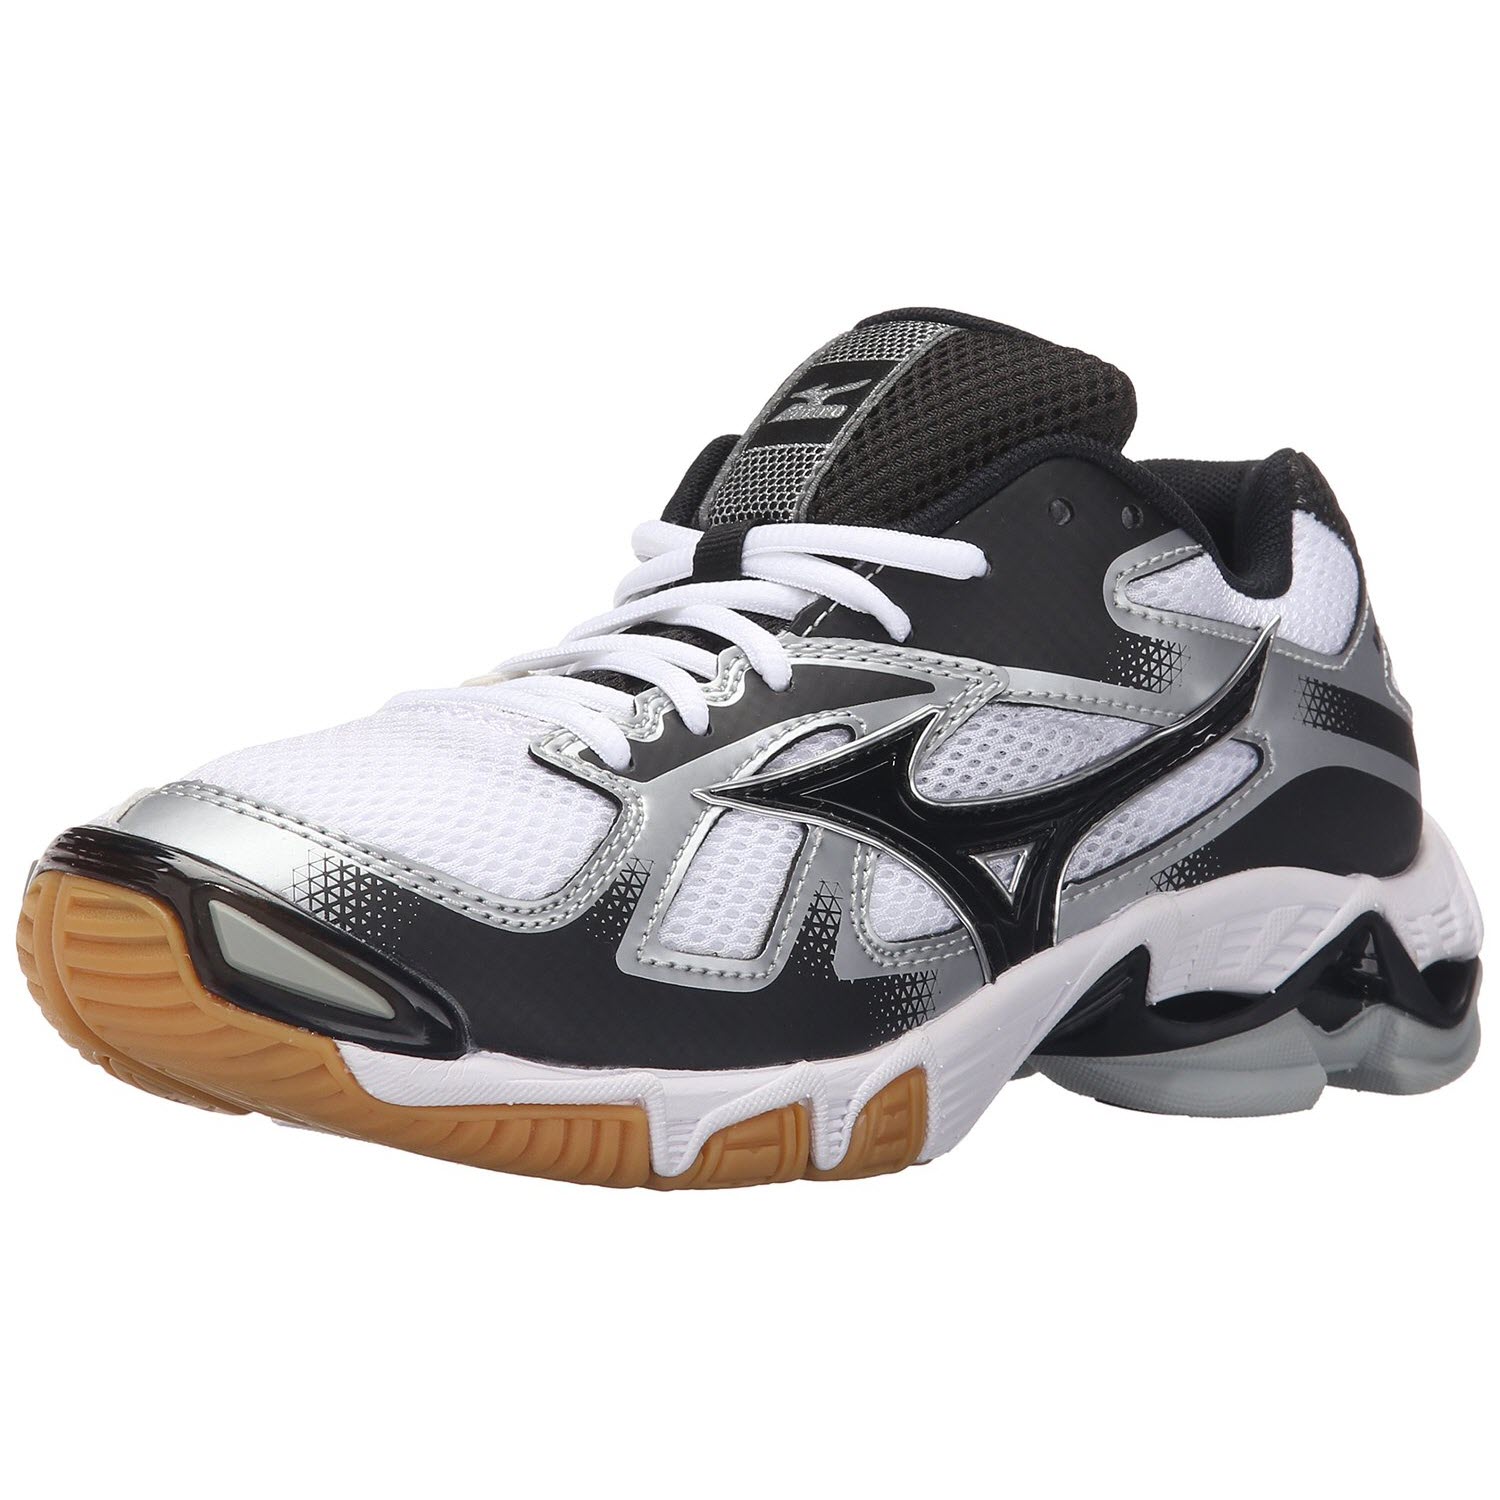 mizuno women's wave bolt 5 volleyball shoes